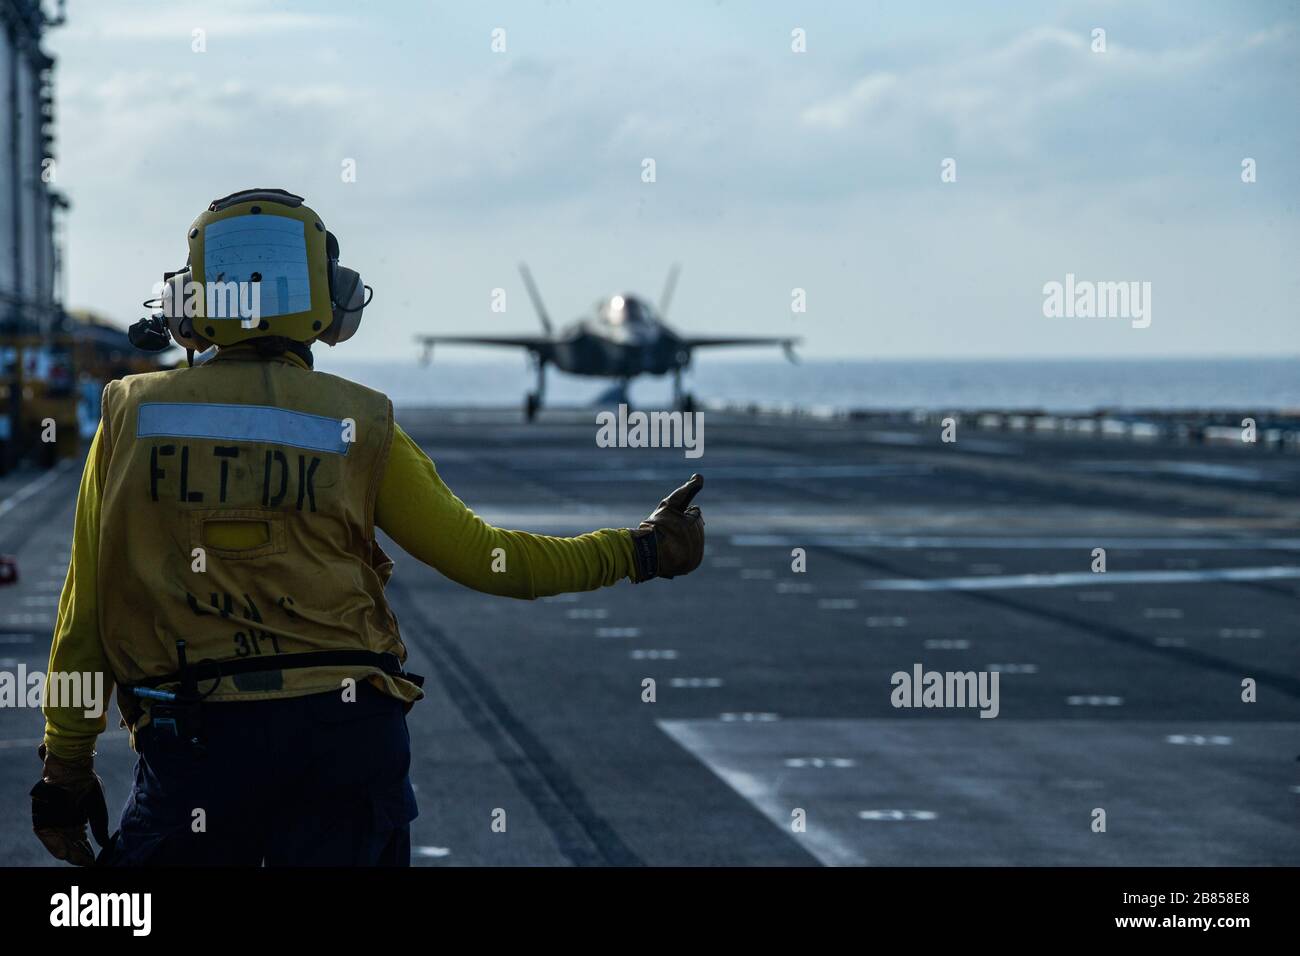 PHILIPPINE SEA (March 18, 2020) An F-35B Lightning II fighter aircraft with Marine Medium Tiltrotor Squadron 265 (Reinforced), 31st Marine Expeditionary Unit (MEU), is cleared for takeoff by a Sailor aboard amphibious assault ship USS America (LHA 6). America, flagship of the America Expeditionary Strike Group, 31st MEU team, is operating in the U.S. 7th Fleet area of operations to enhance interoperability with allies and partners and serve as a ready response force to defend peace and stability in the Indo-Pacific region. (Official U.S. Marine Corps photo by Cpl. Isaac Cantrell) Stock Photo